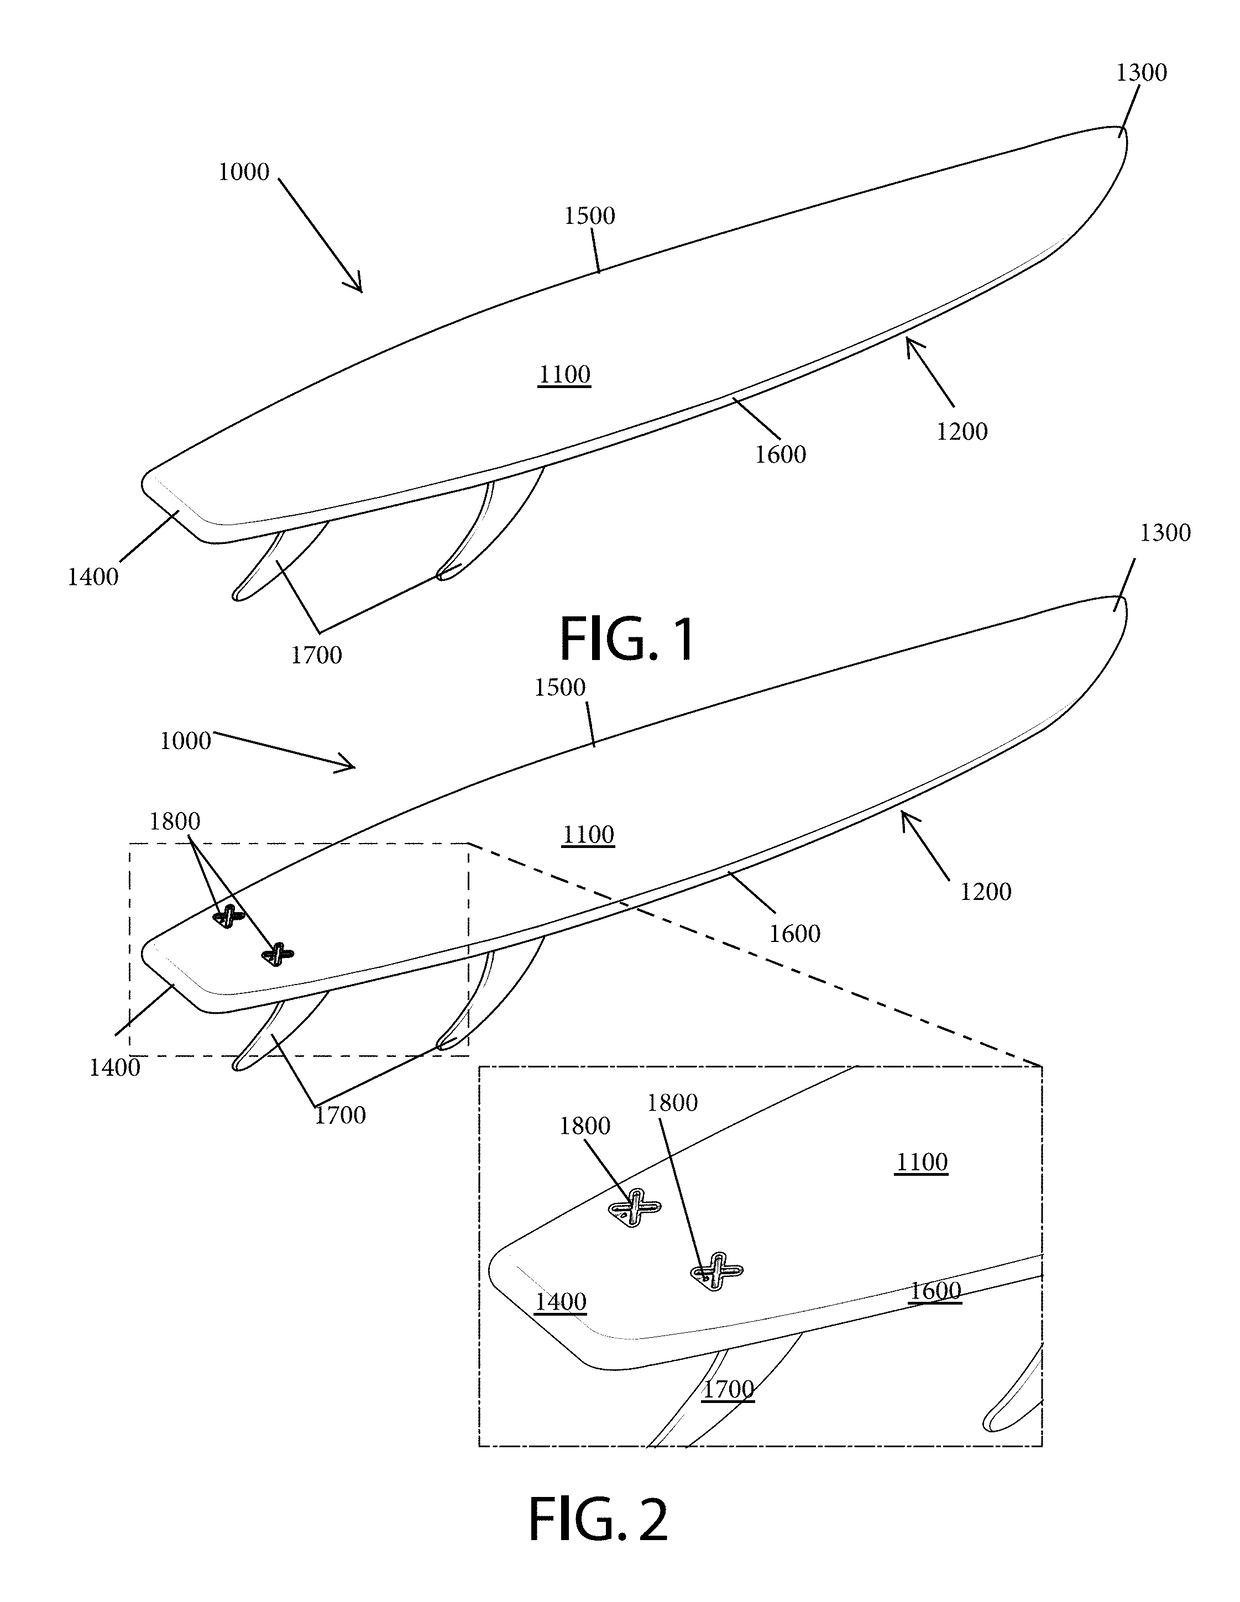 Mounting apparatus and related methods of fabricating or retrofitting a surfboard with said mounting apparatus